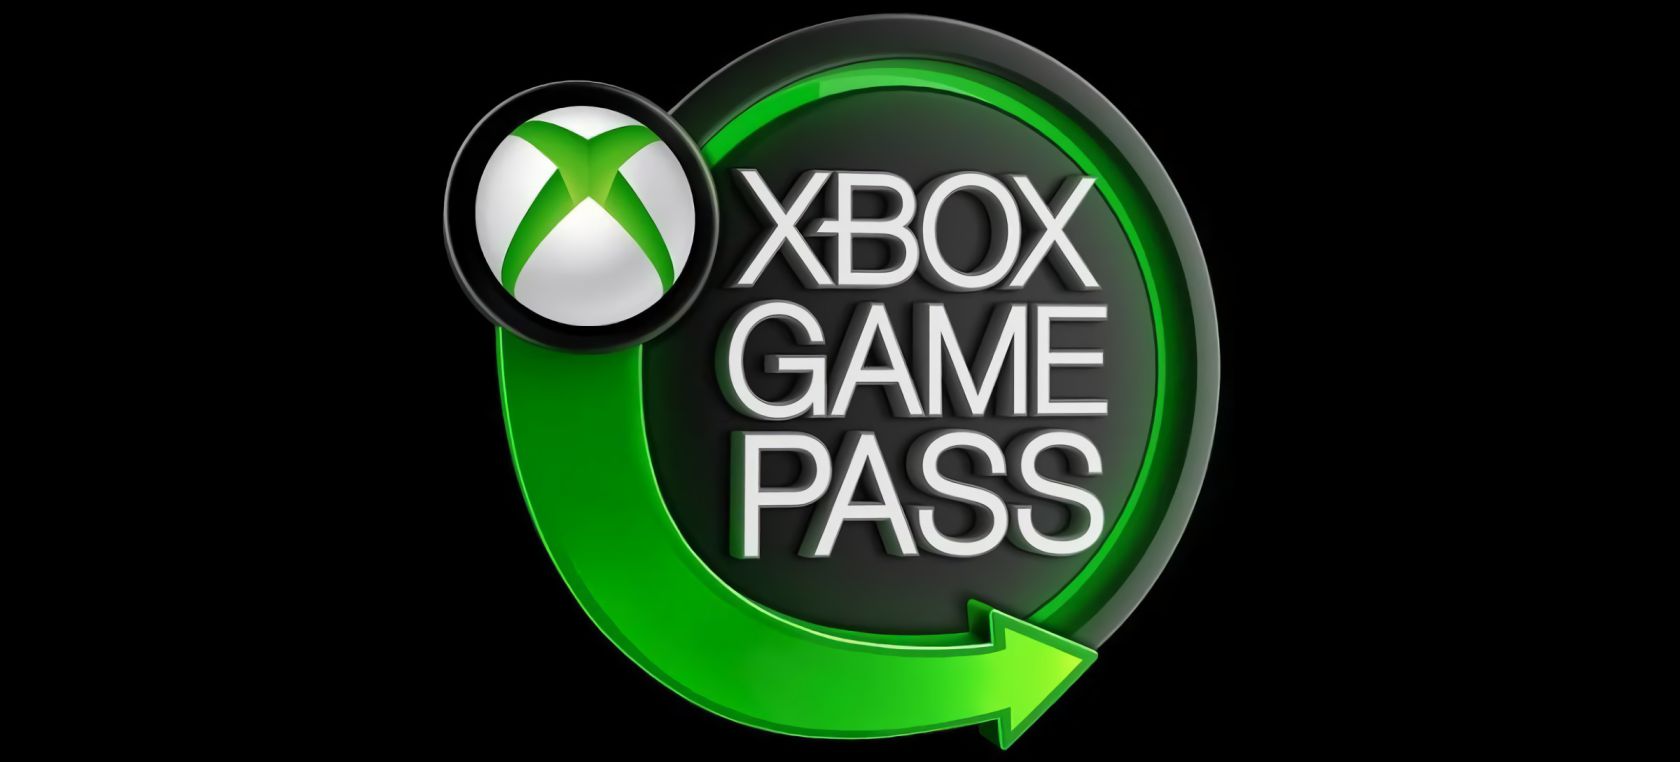 how much is a year of xbox ultimate game pass